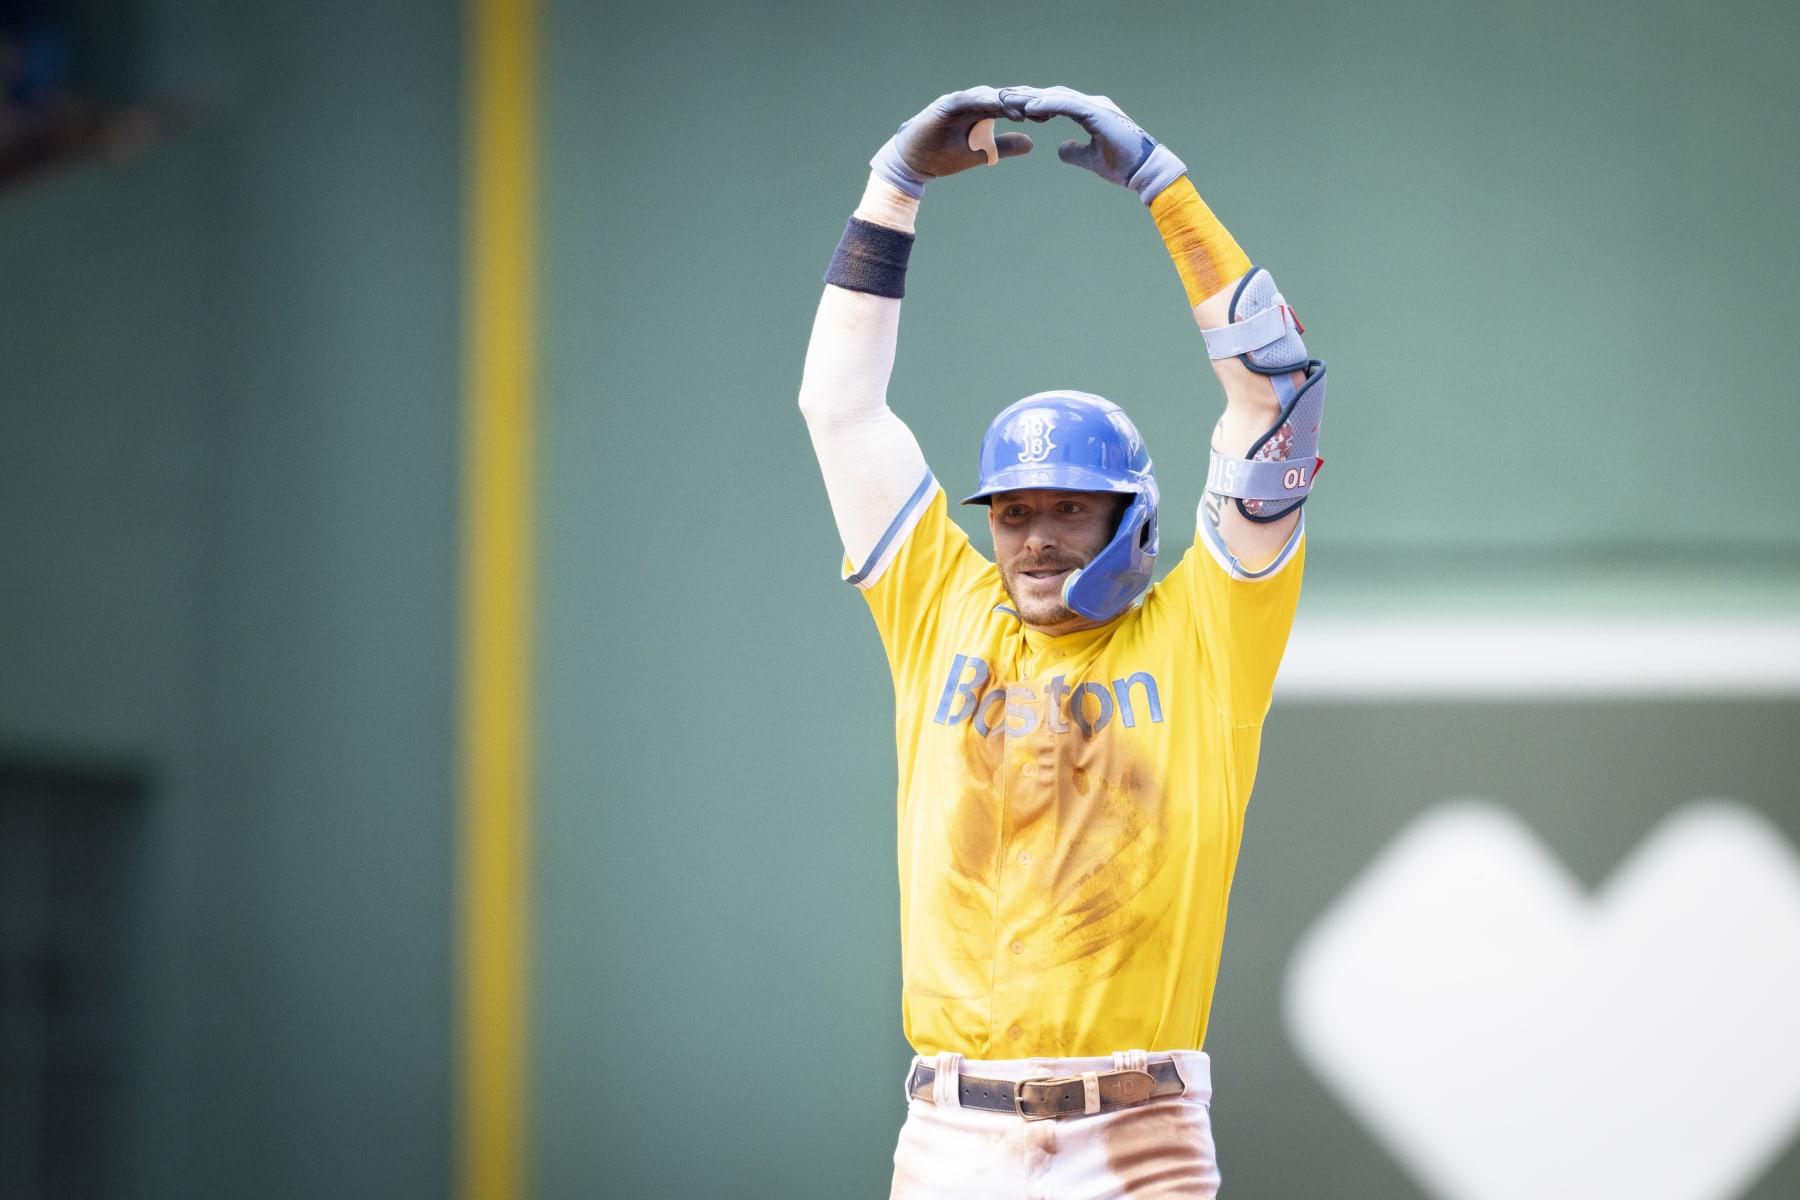 Red Sox on X: You know what it is Blue and yellow. Blue and yellow.  Blue and yellow. Blue and yellow.  / X